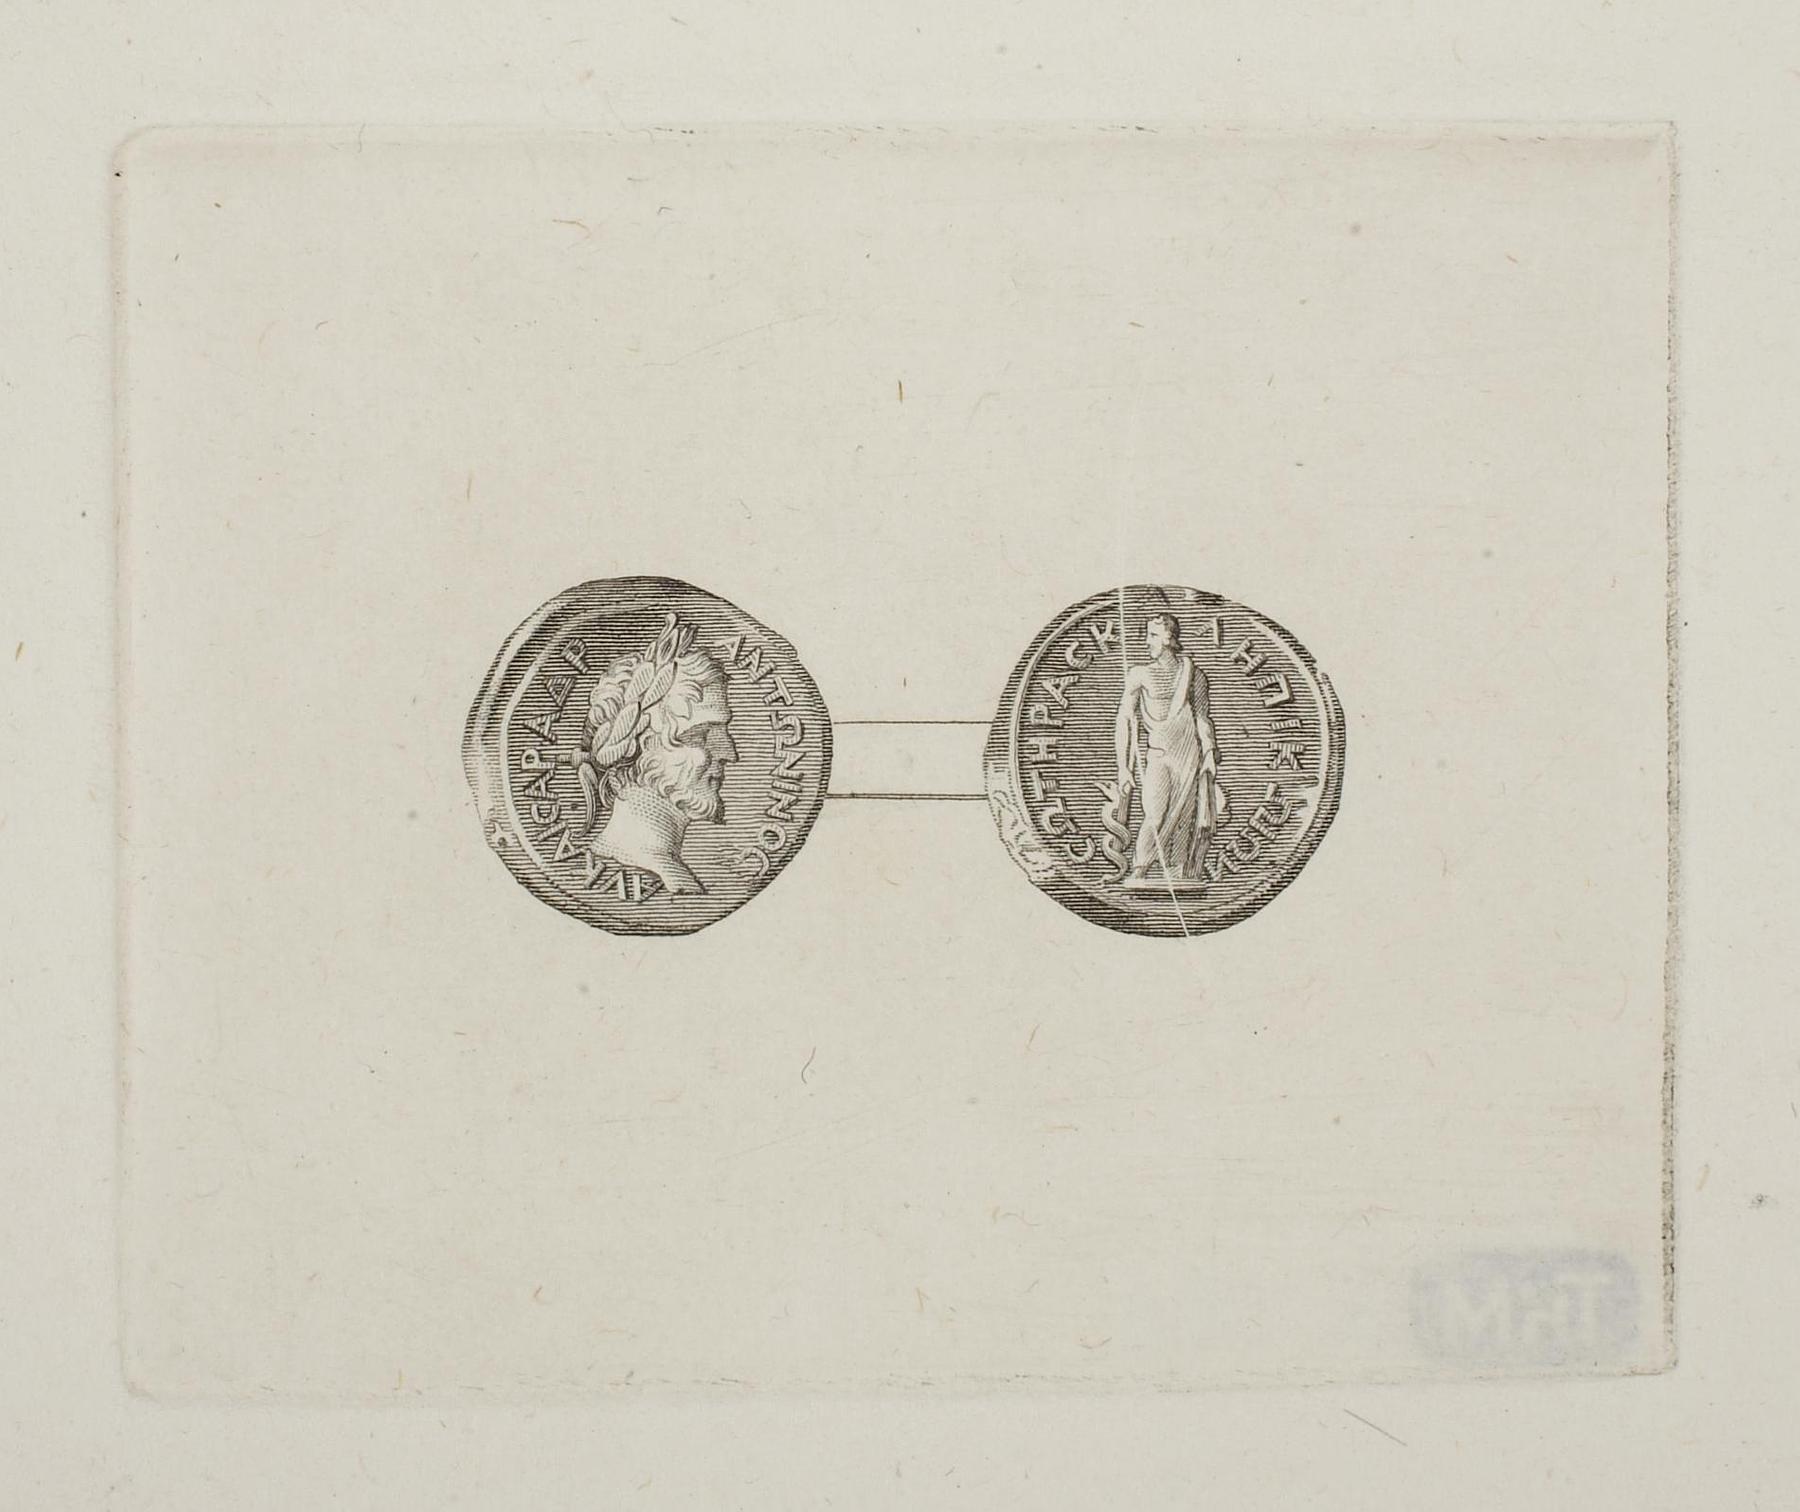 Greek coins obverse and reverse, E1558